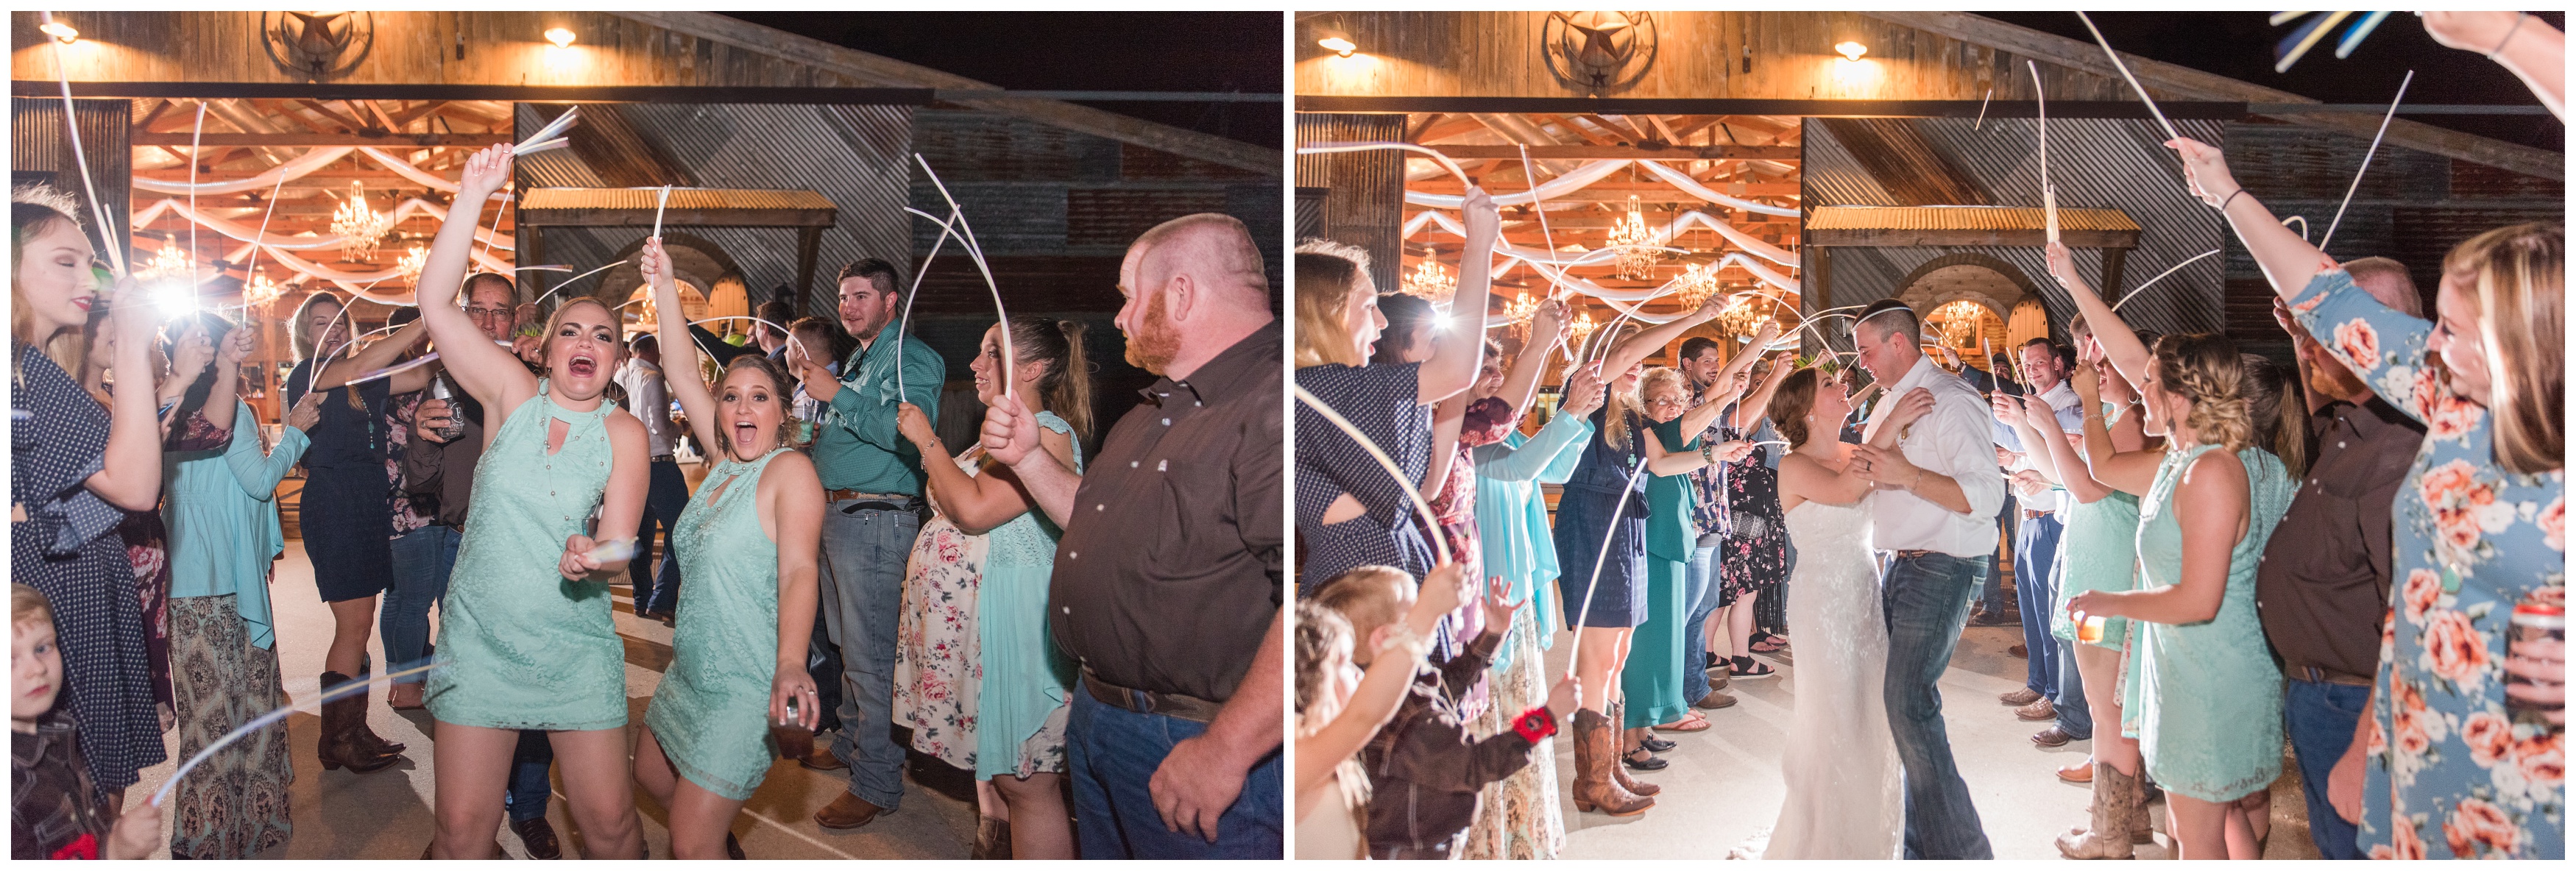 The Barn at Four Pines Wedding in Crosby TX - Kevin and Sammi_0393